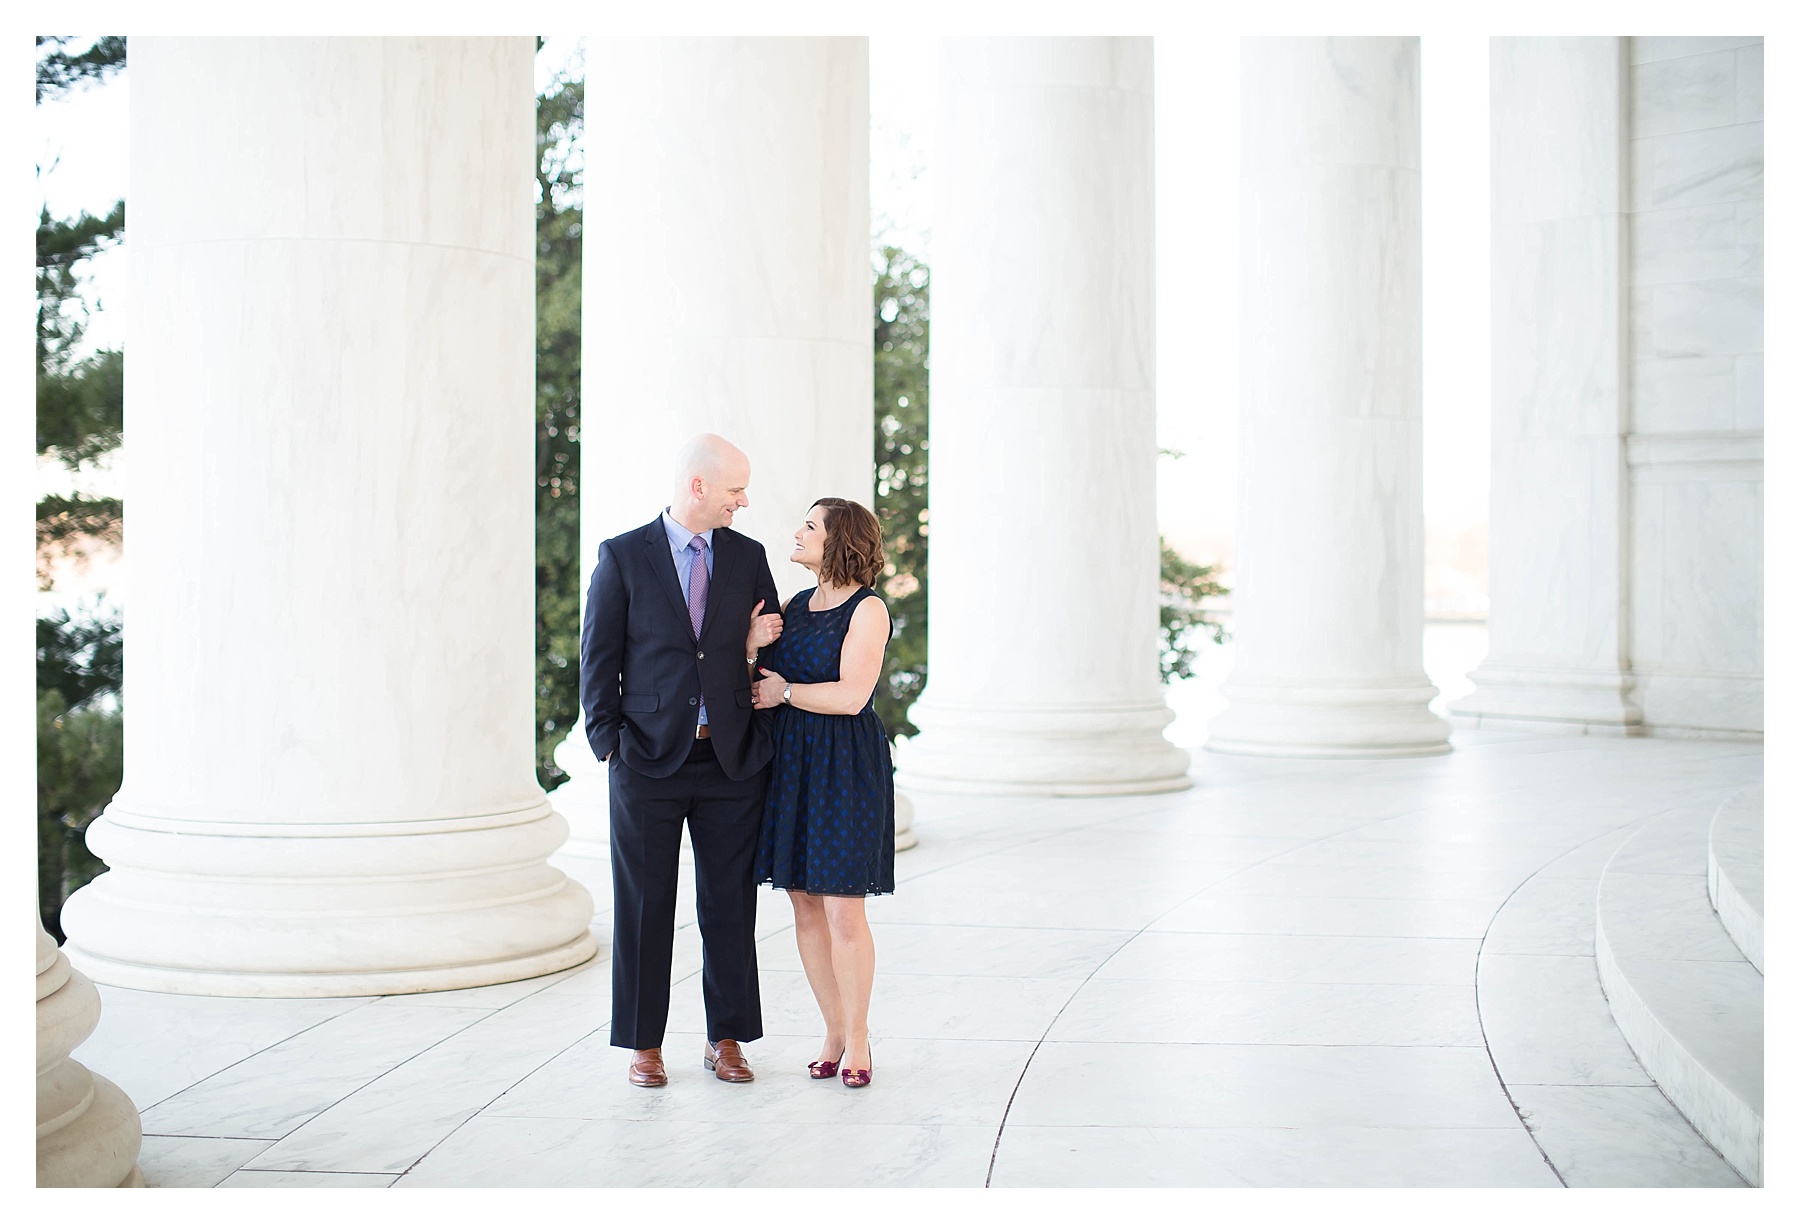 Candice Adelle Photography DC Destination Wedding Photographer Cherry Blossom Engagment Session_0039.jpg